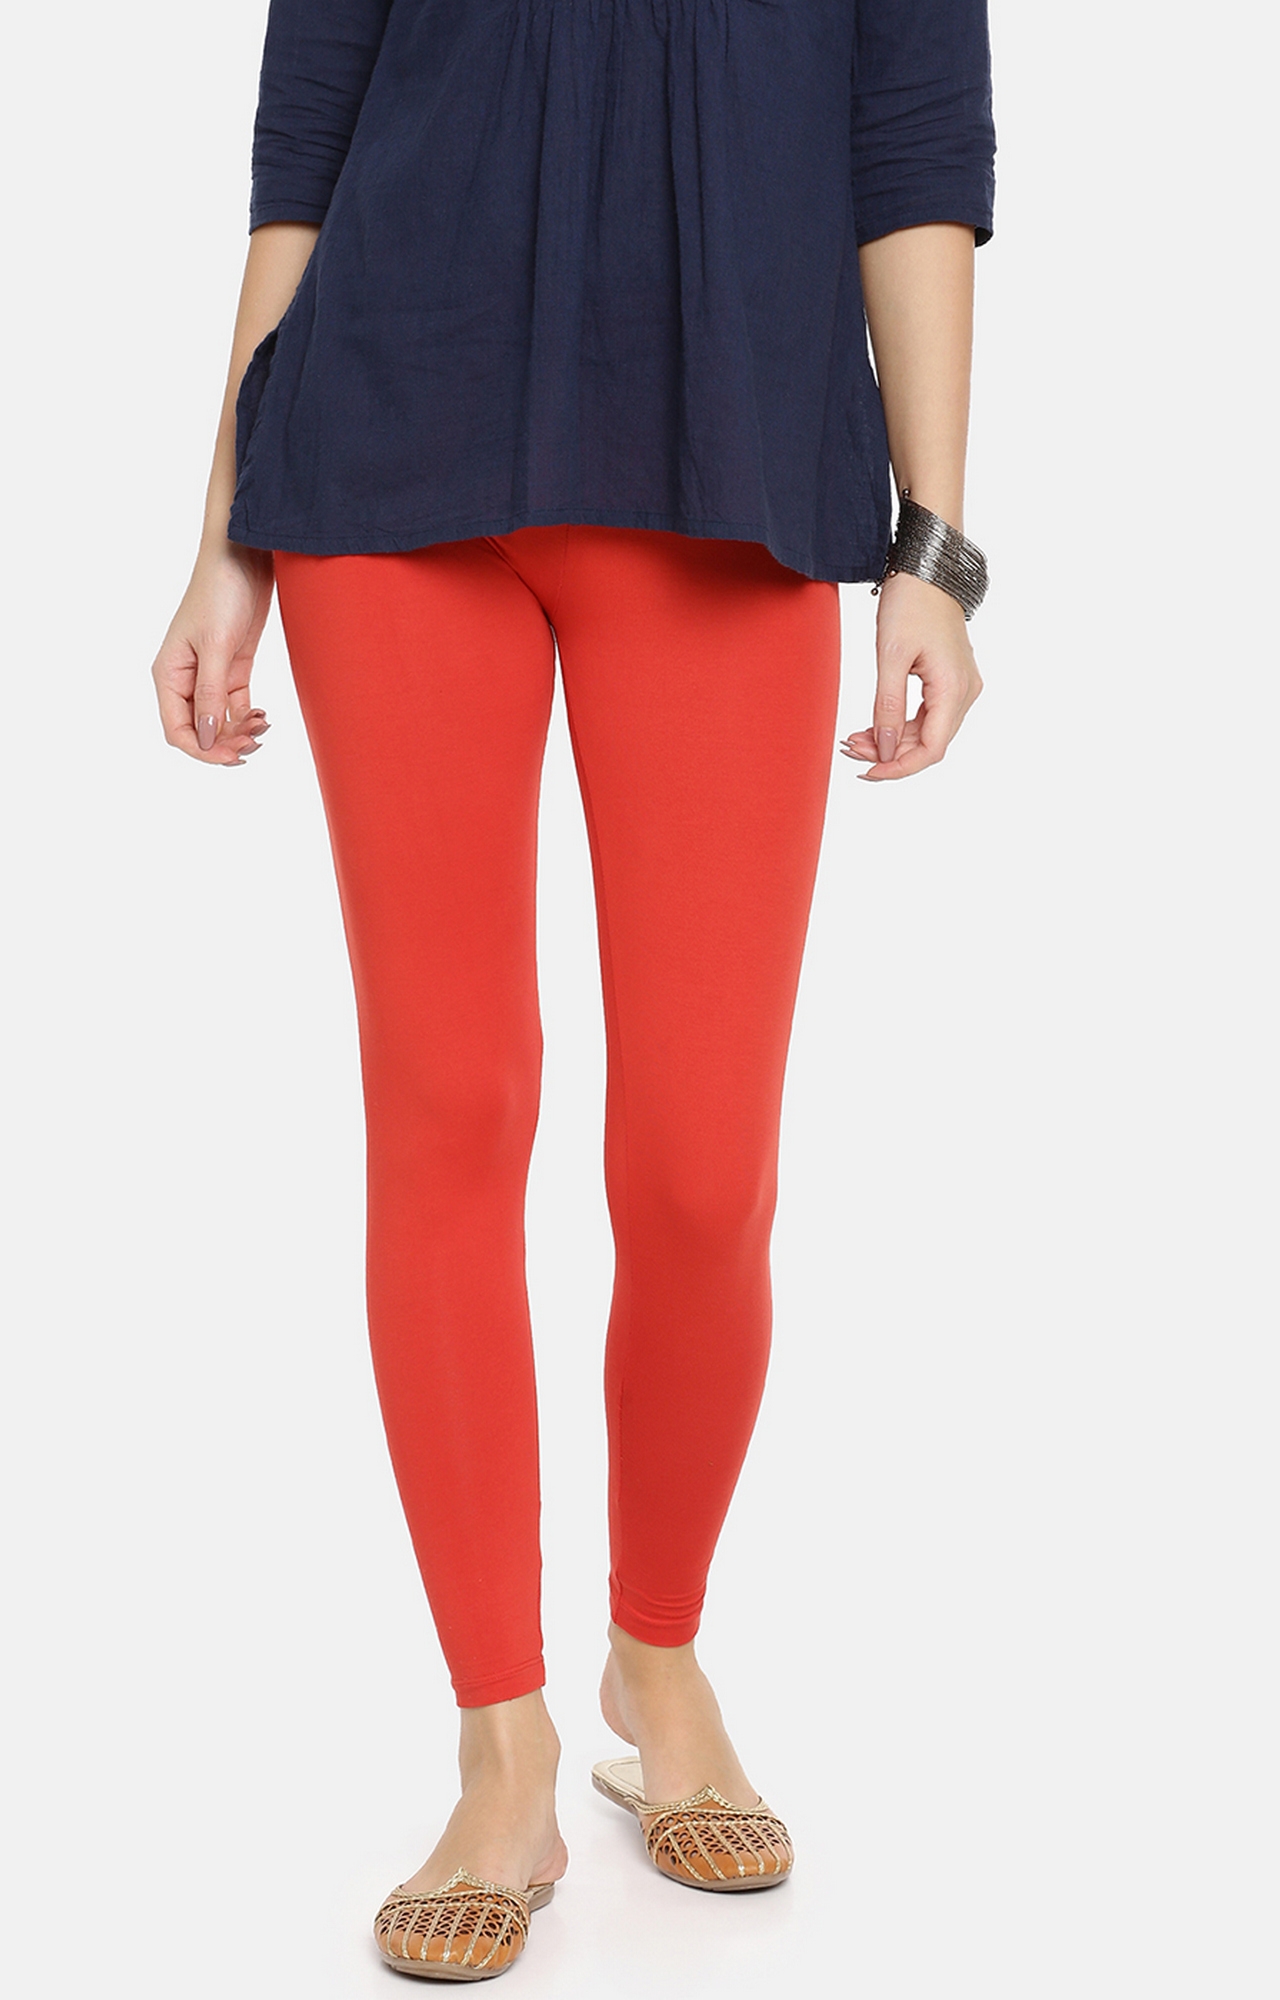 Twinbirds Tomato Red Solid Ankle Legging